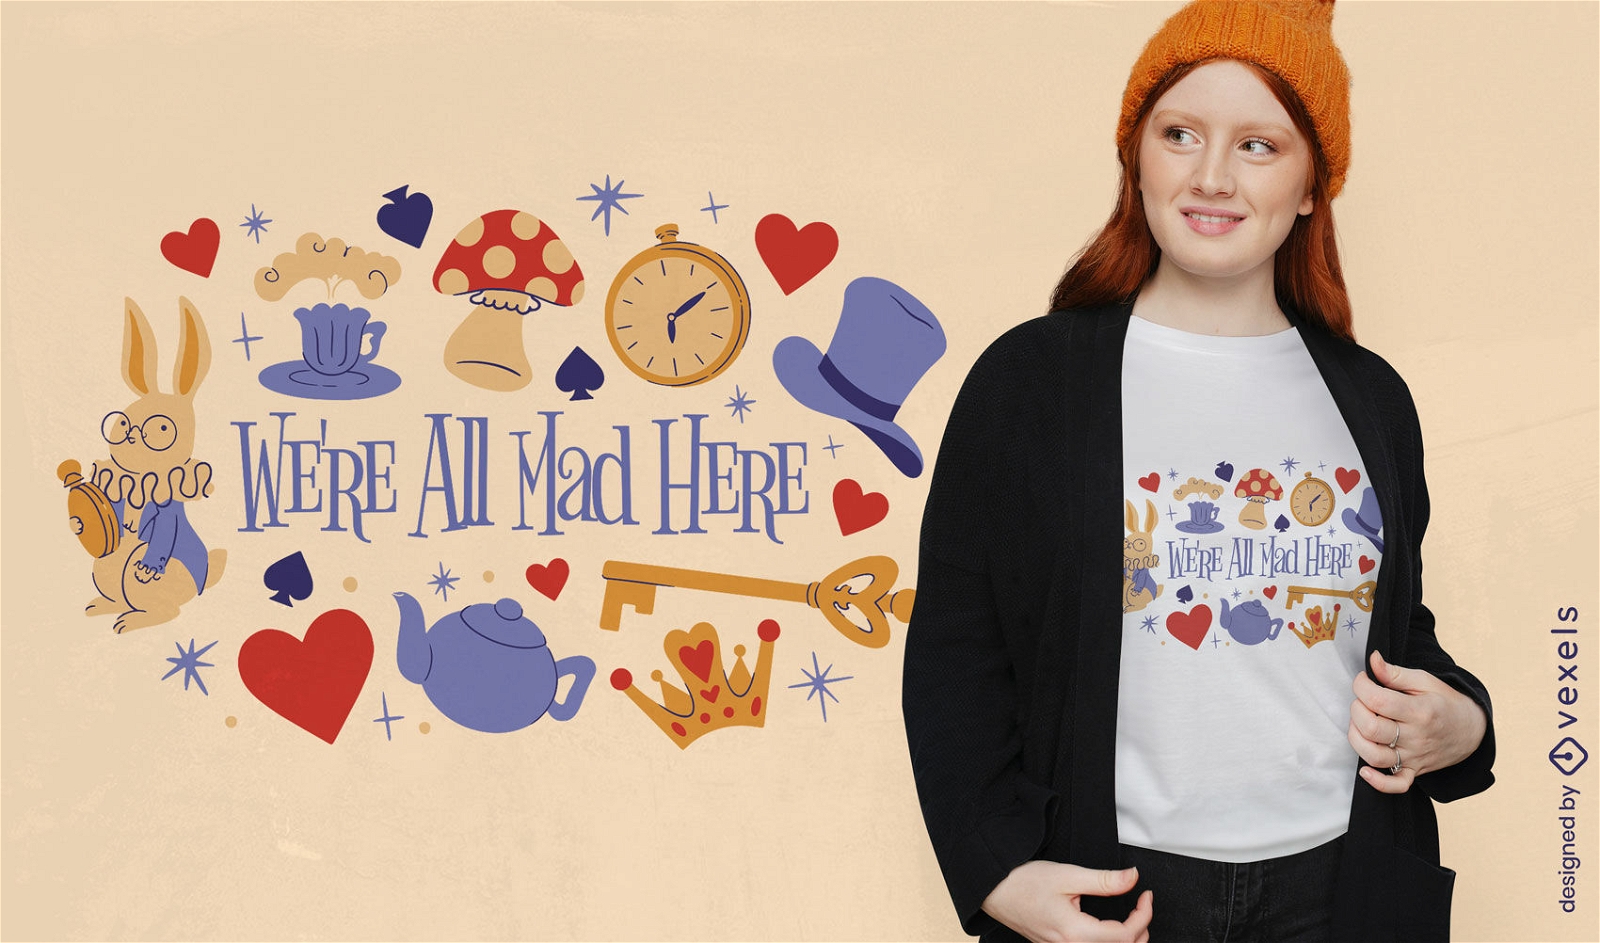 We're all mad movie quote t-shirt design